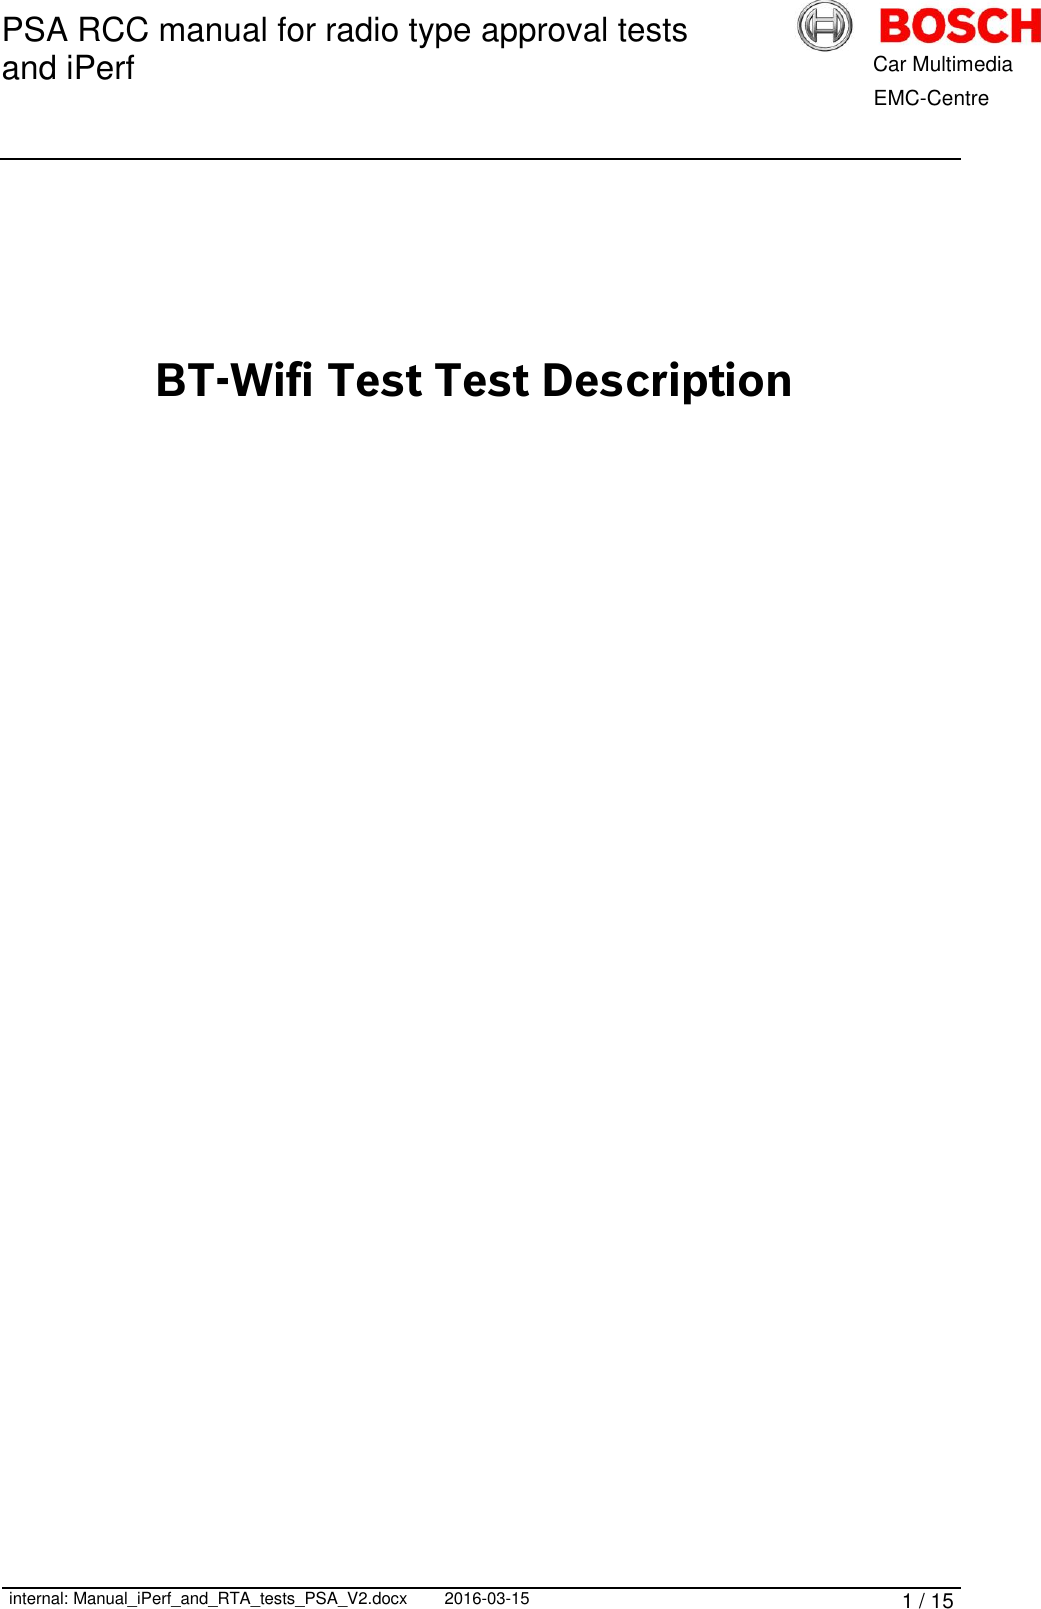 PSA RCC manual for radio type approval tests and iPerf      internal: Manual_iPerf_and_RTA_tests_PSA_V2.docx 2016-03-15 1 / 15            Car Multimedia       EMC-Centre     BT-Wifi Test Test Description     